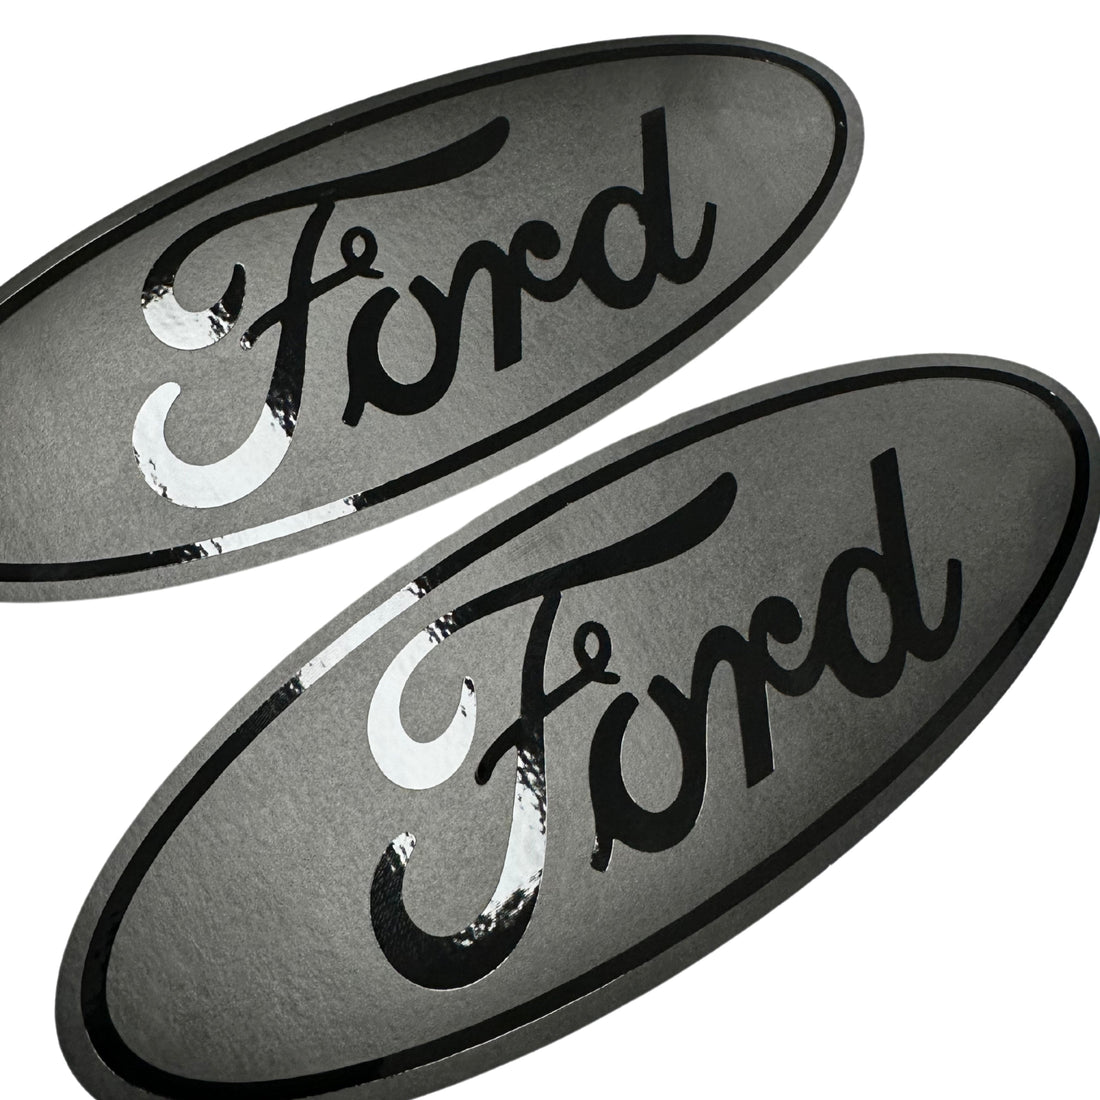 Ford Ranger Badge Overlays (PX2, PX3)CosmeticNXG